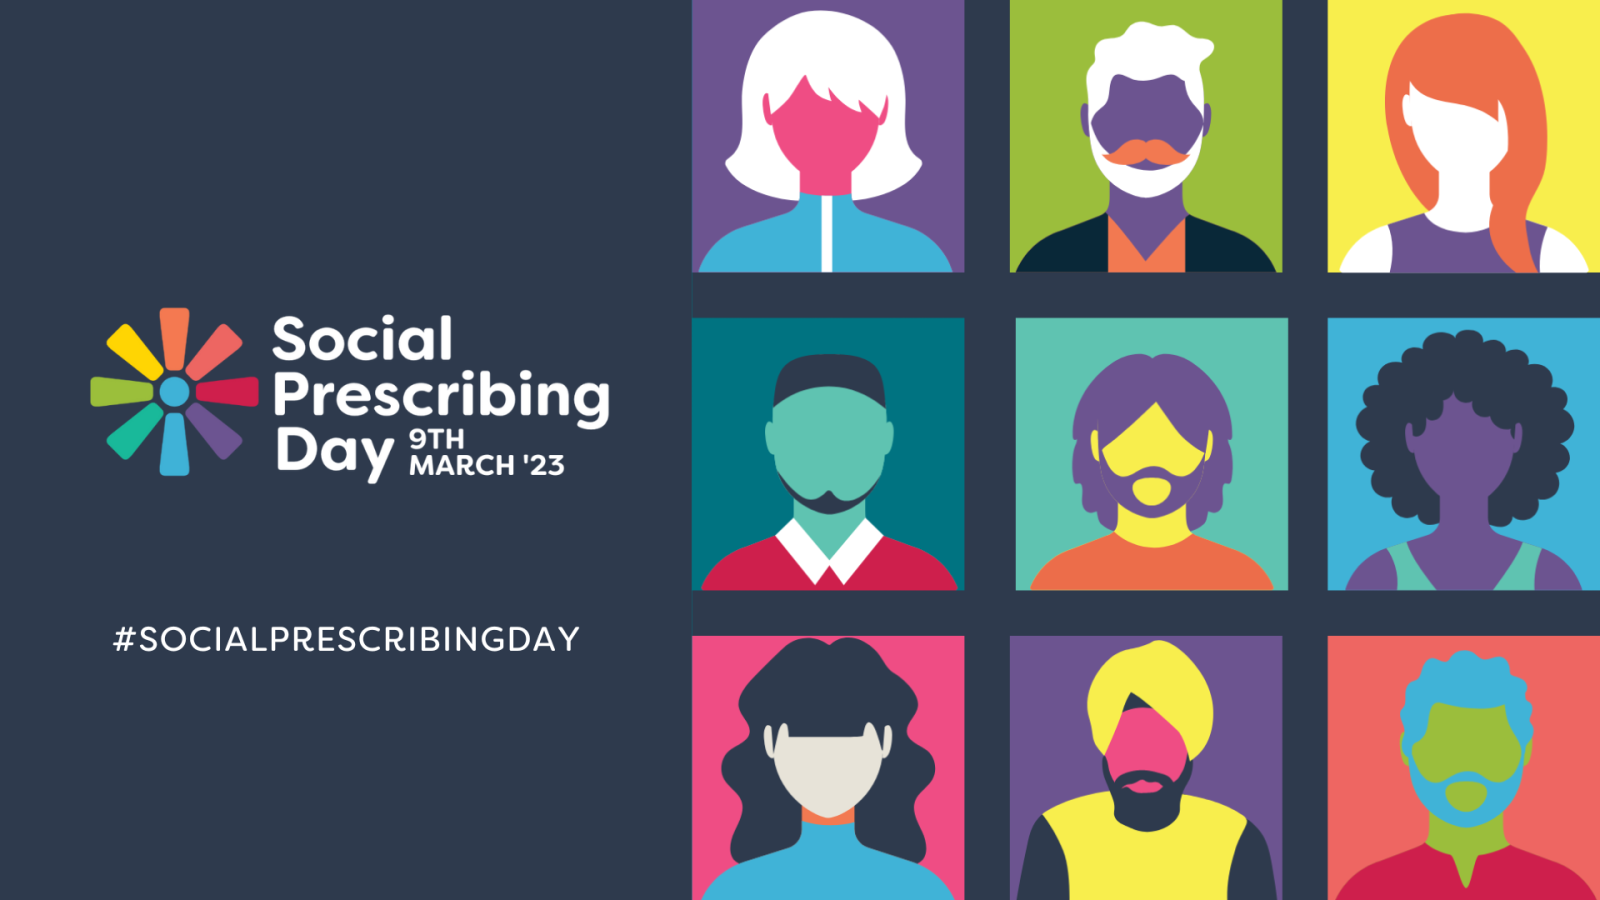 Image of Social Prescribers Day with illustrations of people.